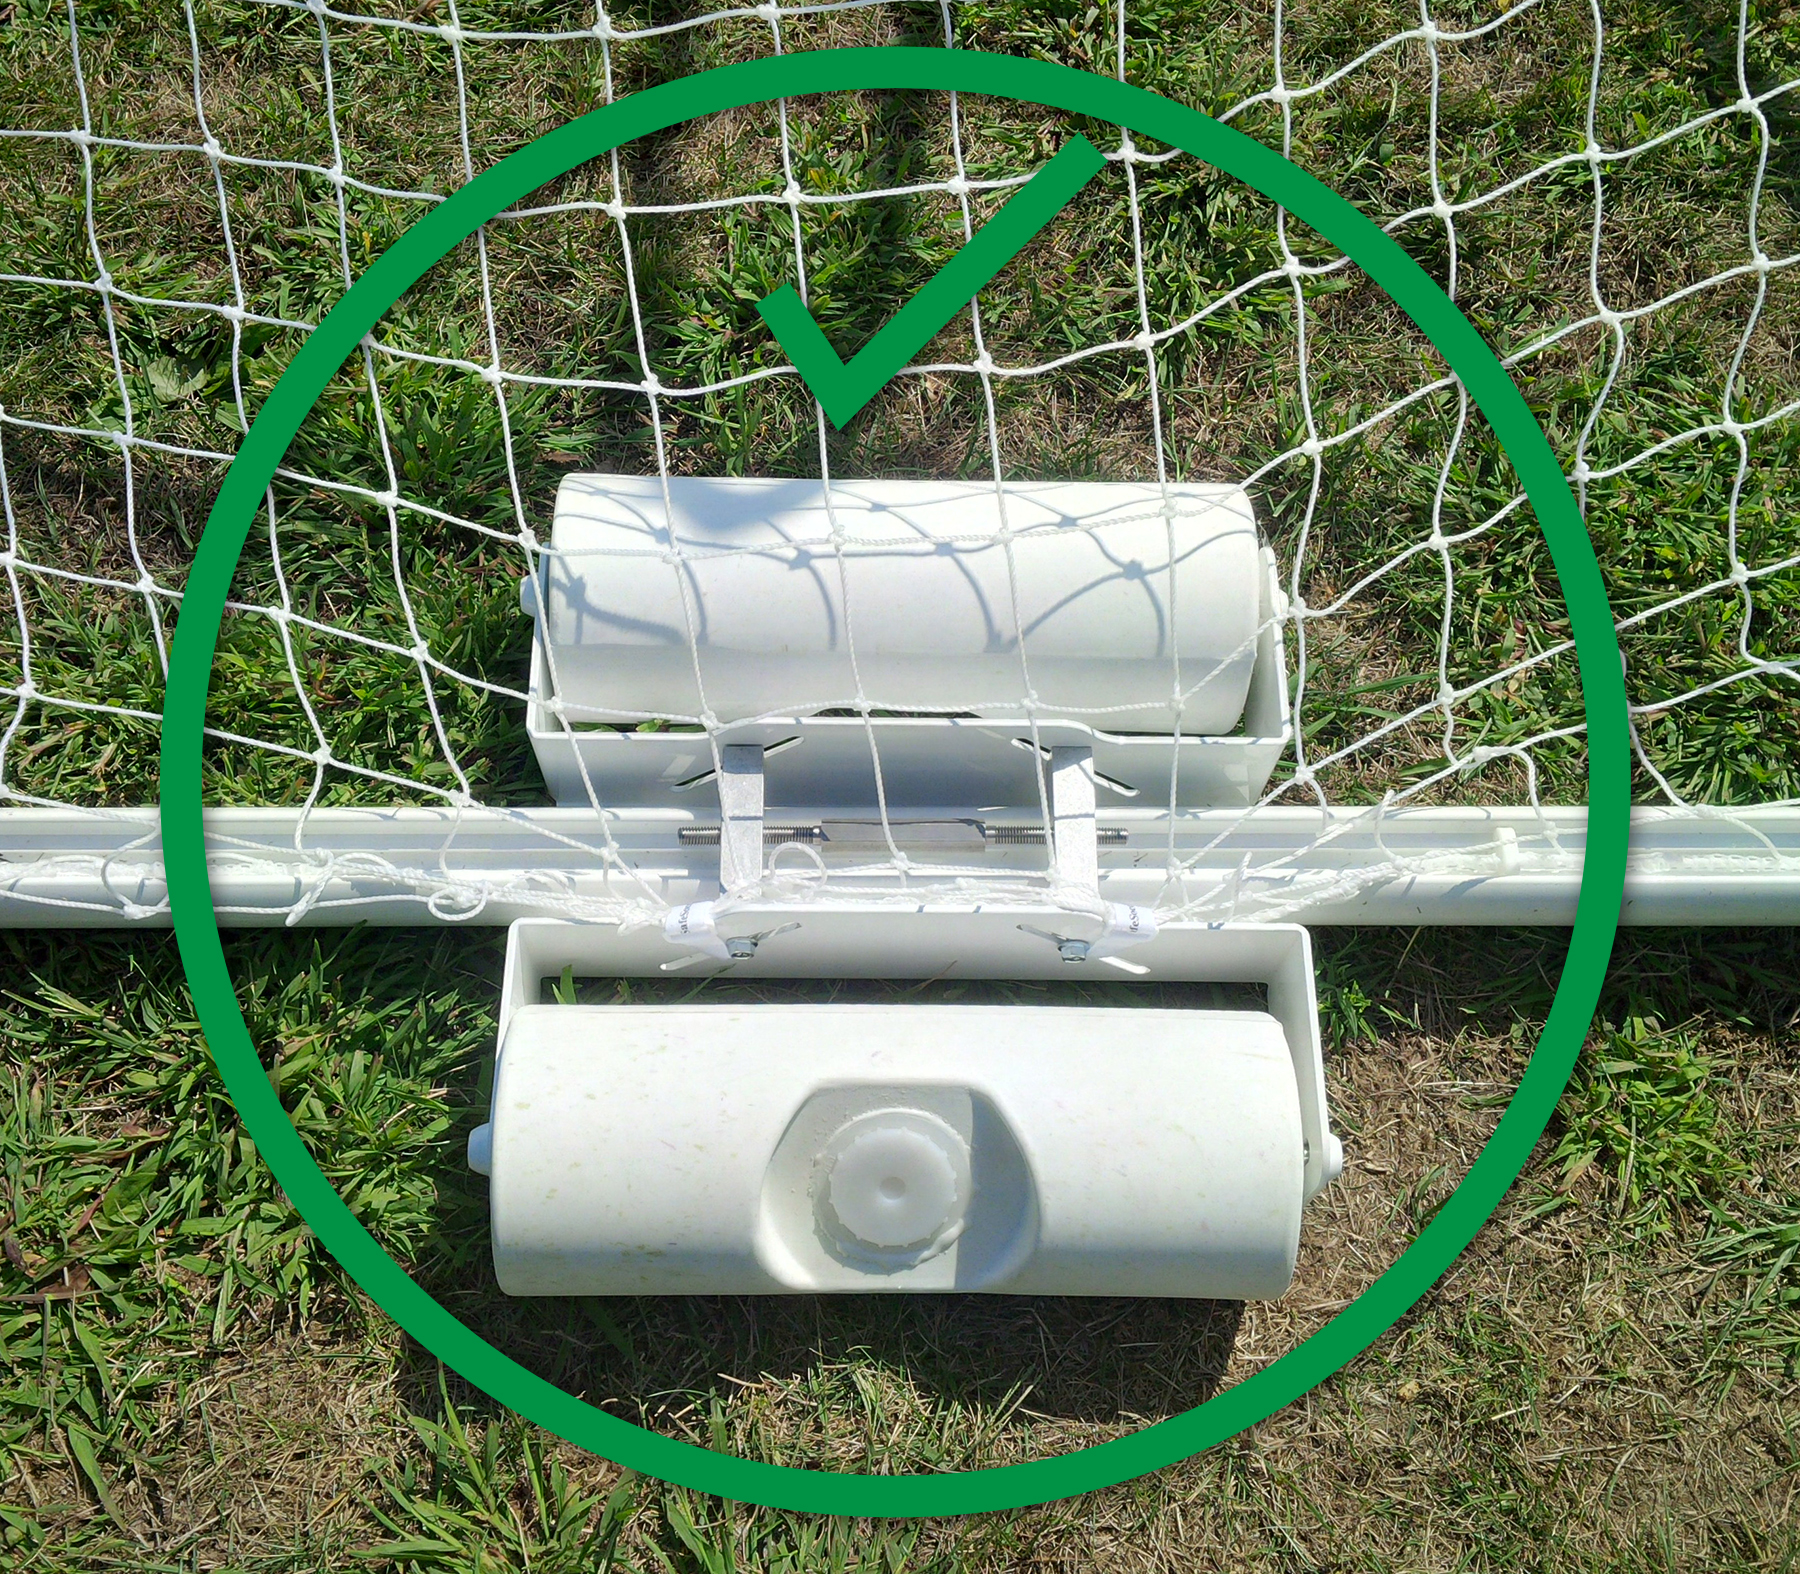 Soccer goal with SSG-14 correctly applied